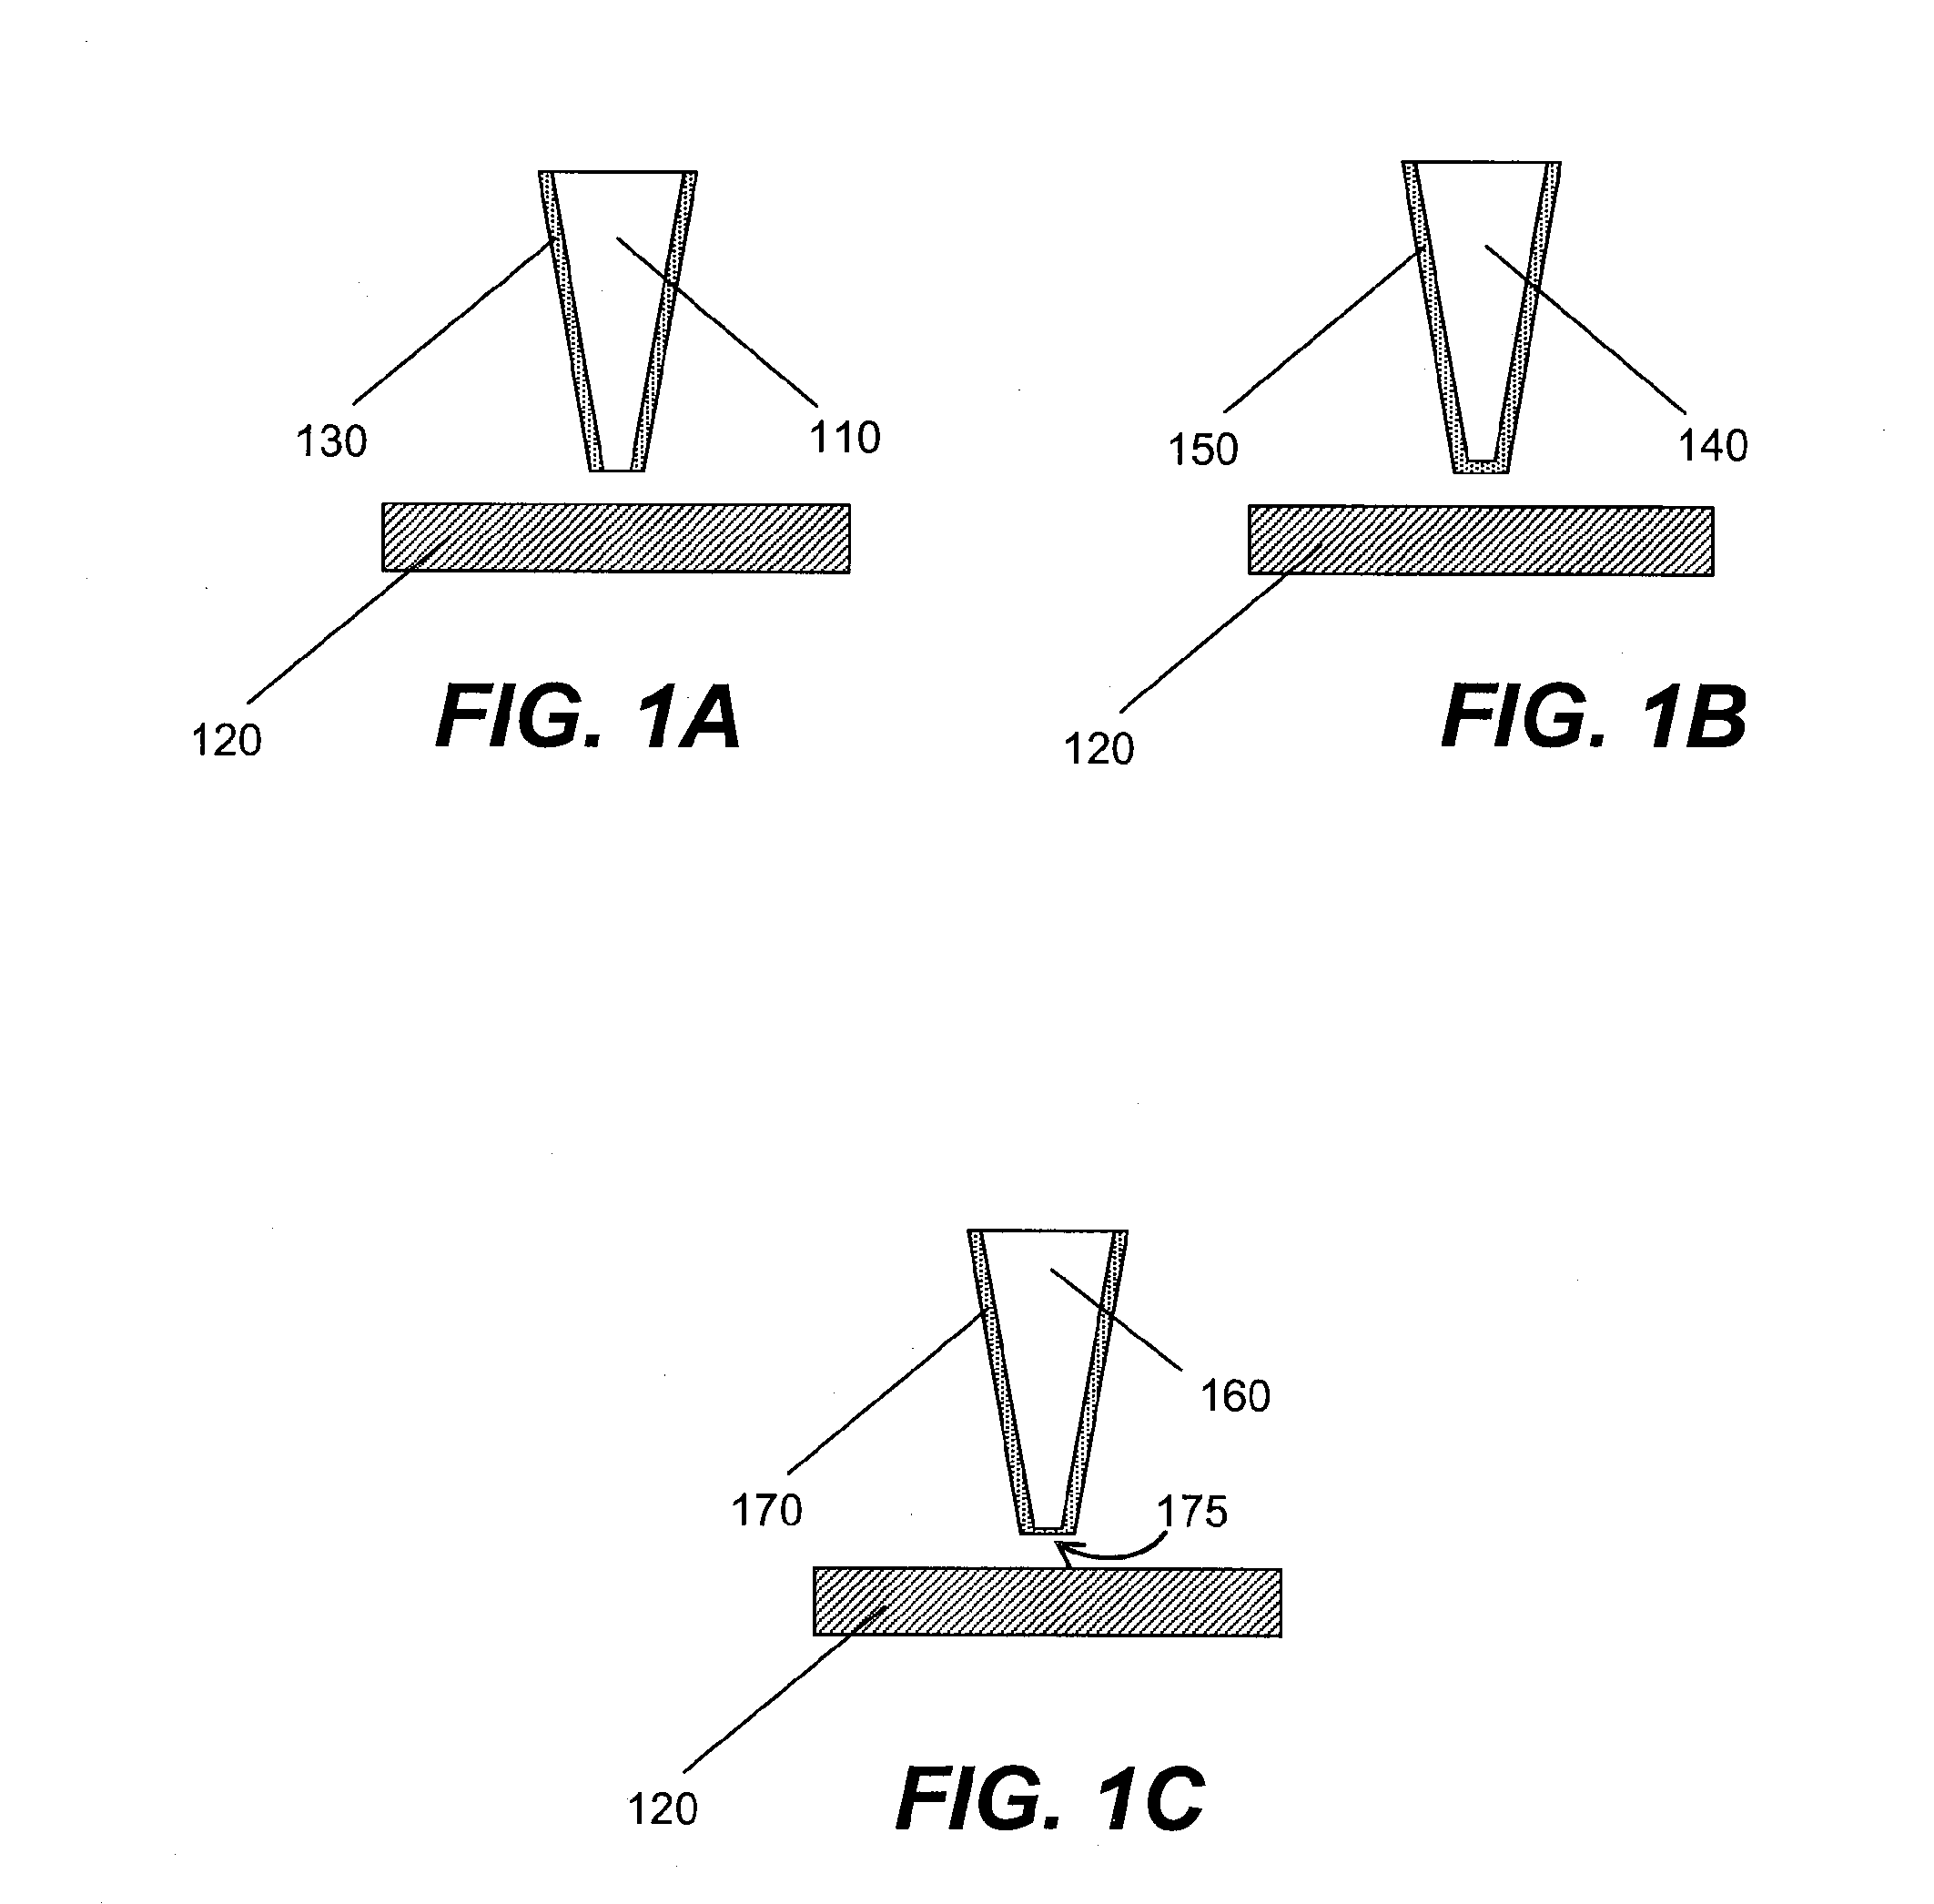 Laser-assisted nanomaterial deposition, nanomanufacturing, in situ monitoring and associated apparatus